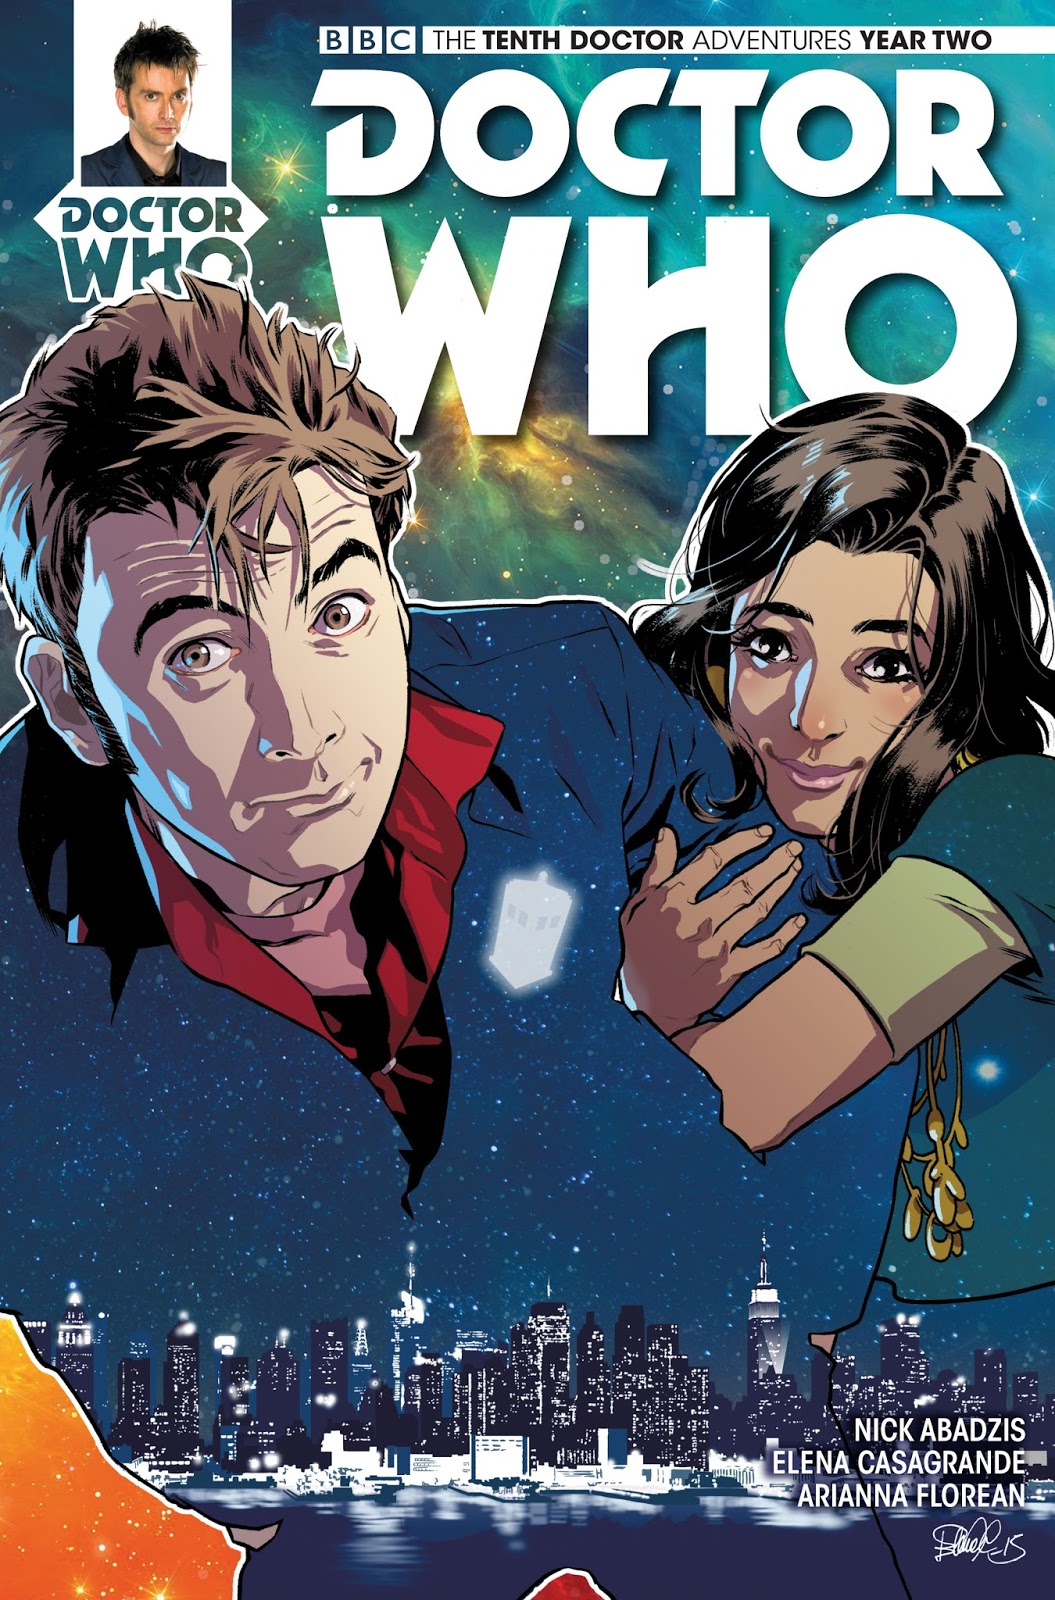 Cover B Doctor Who US Comic Titan The Tenth Doctor #2 Tennant 